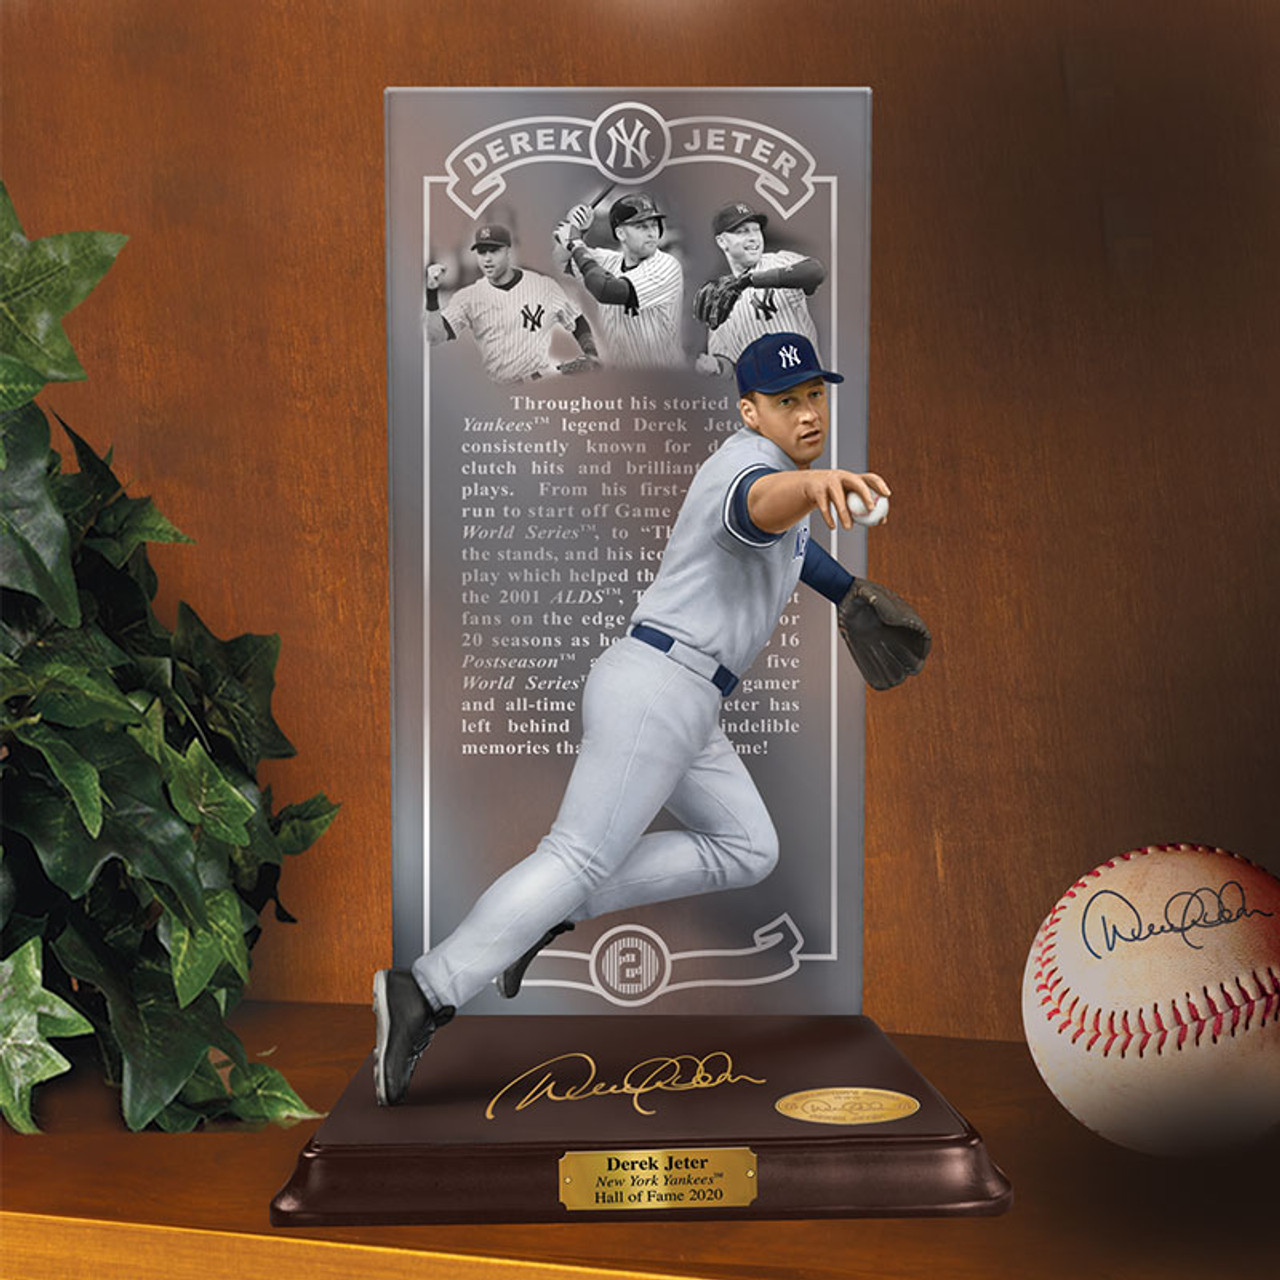 Derek Jeter New York Yankees Framed 15 x 17 Hall of Fame Career Collage with A Capsule Game-Used Dirt - Limited Edition 1000